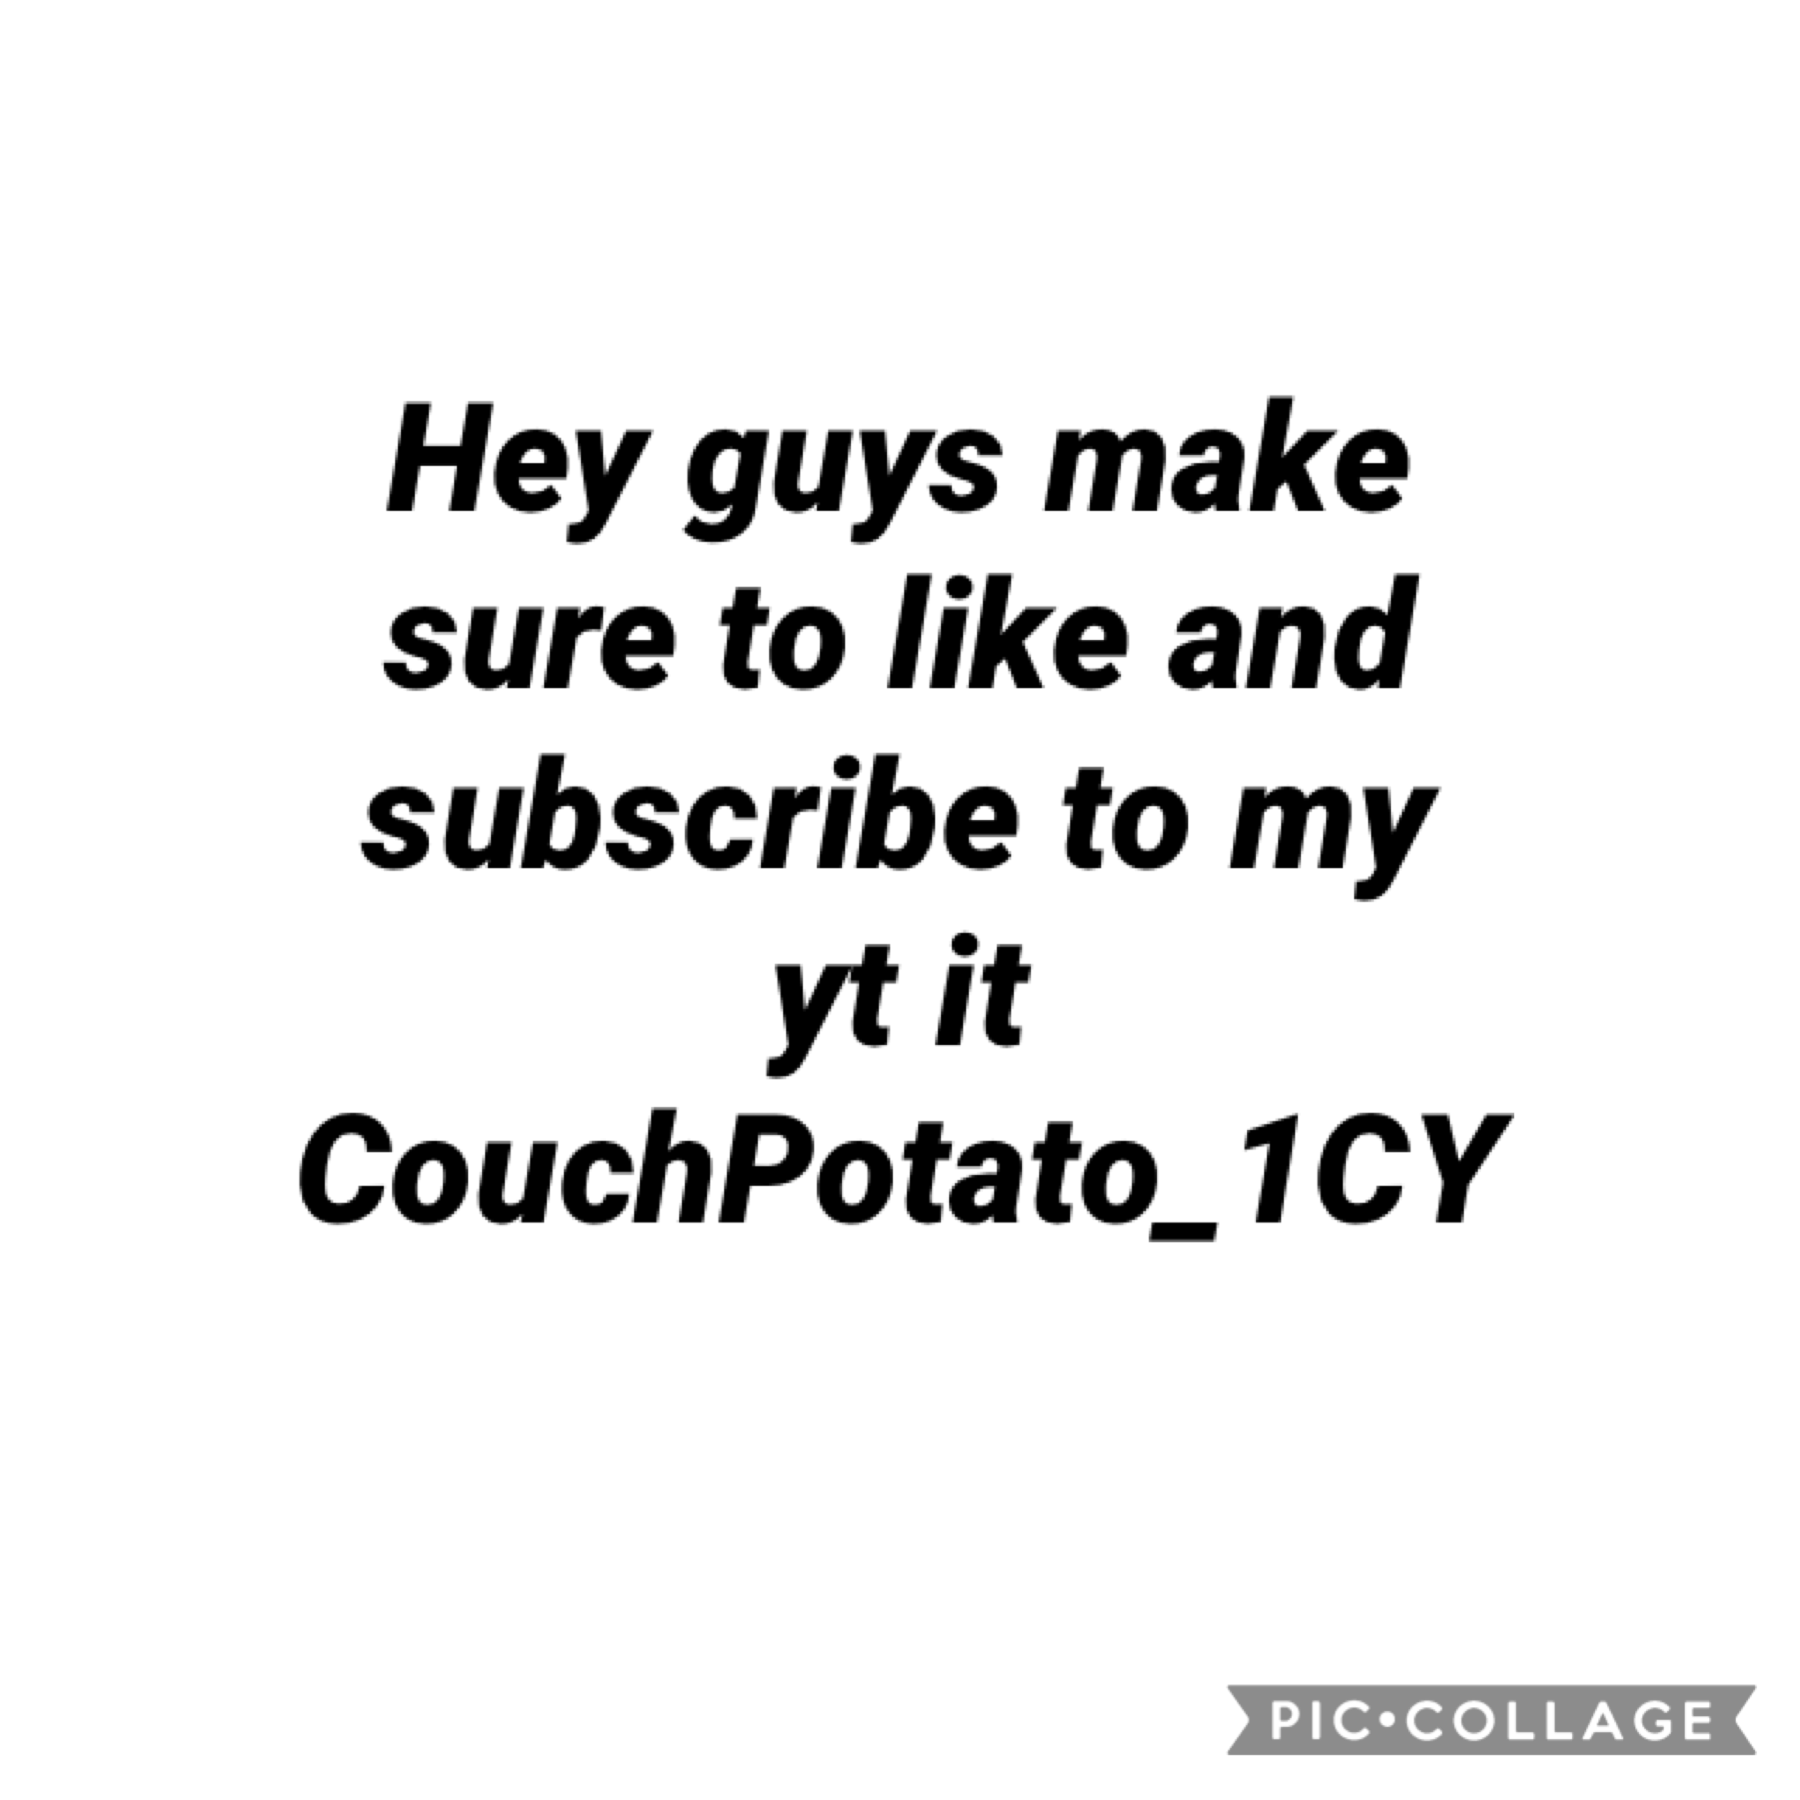 Sub and like 2 my yt CouchPotato_1CY